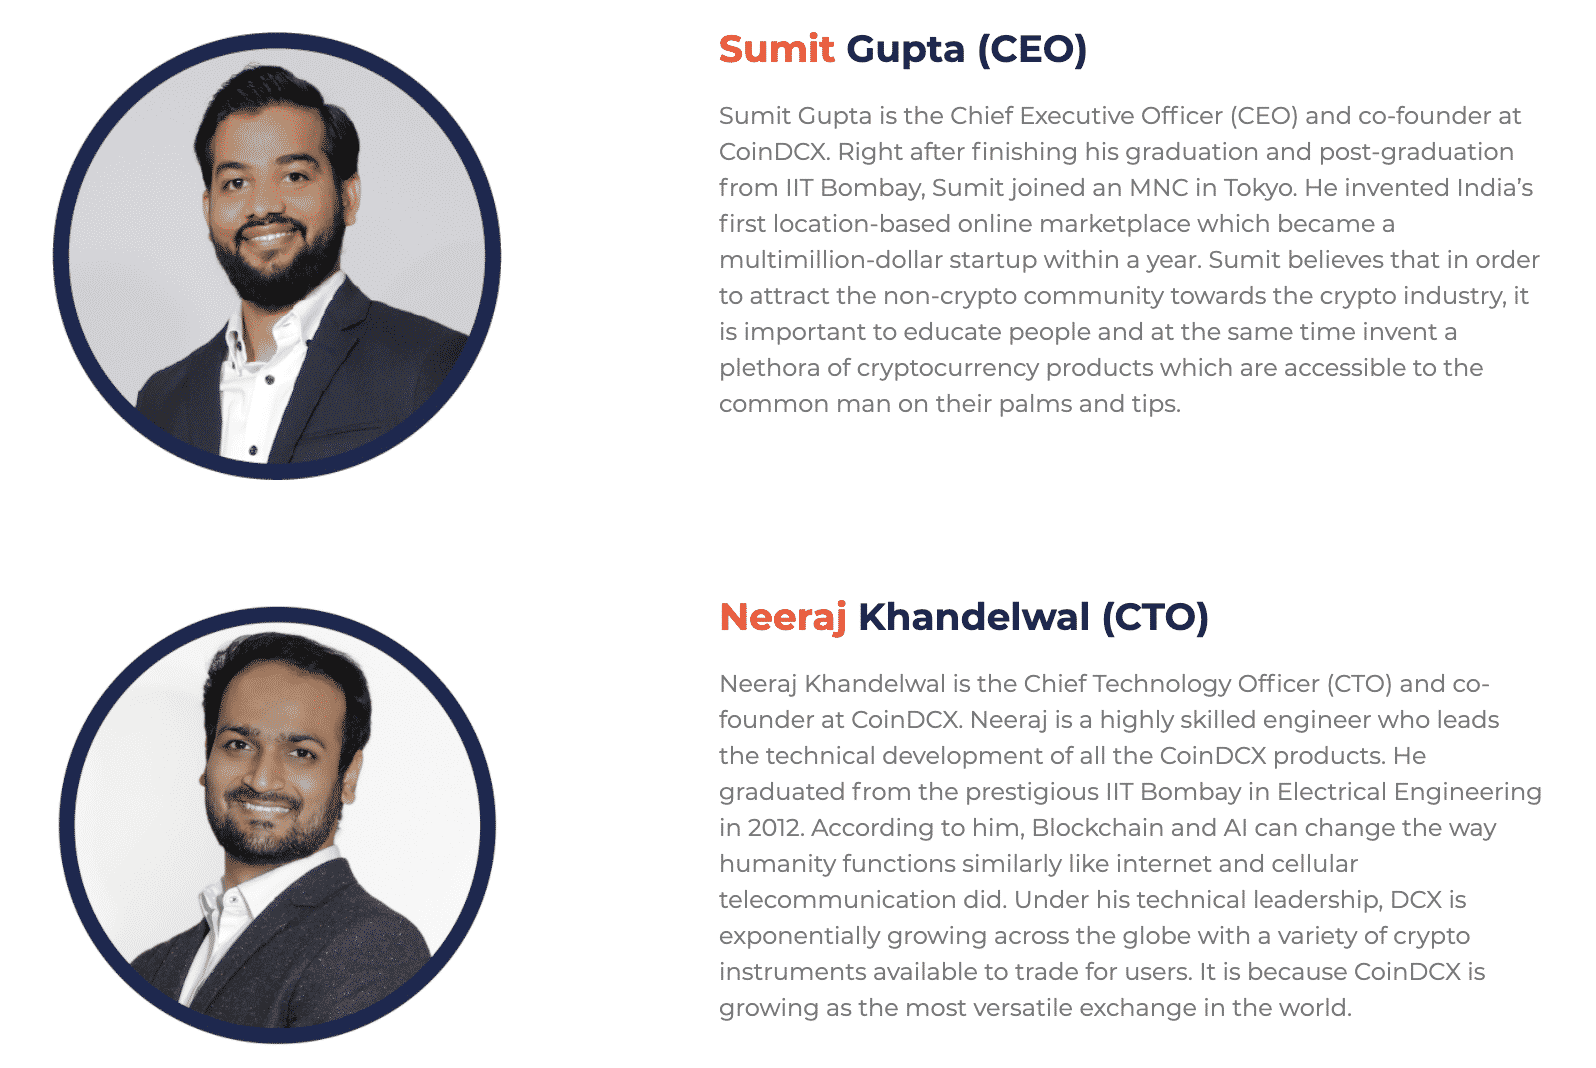 The site bios for CoinDCX Founders Sumit Gupta and Neeraj Khandelwal, courtesy CoinDCX